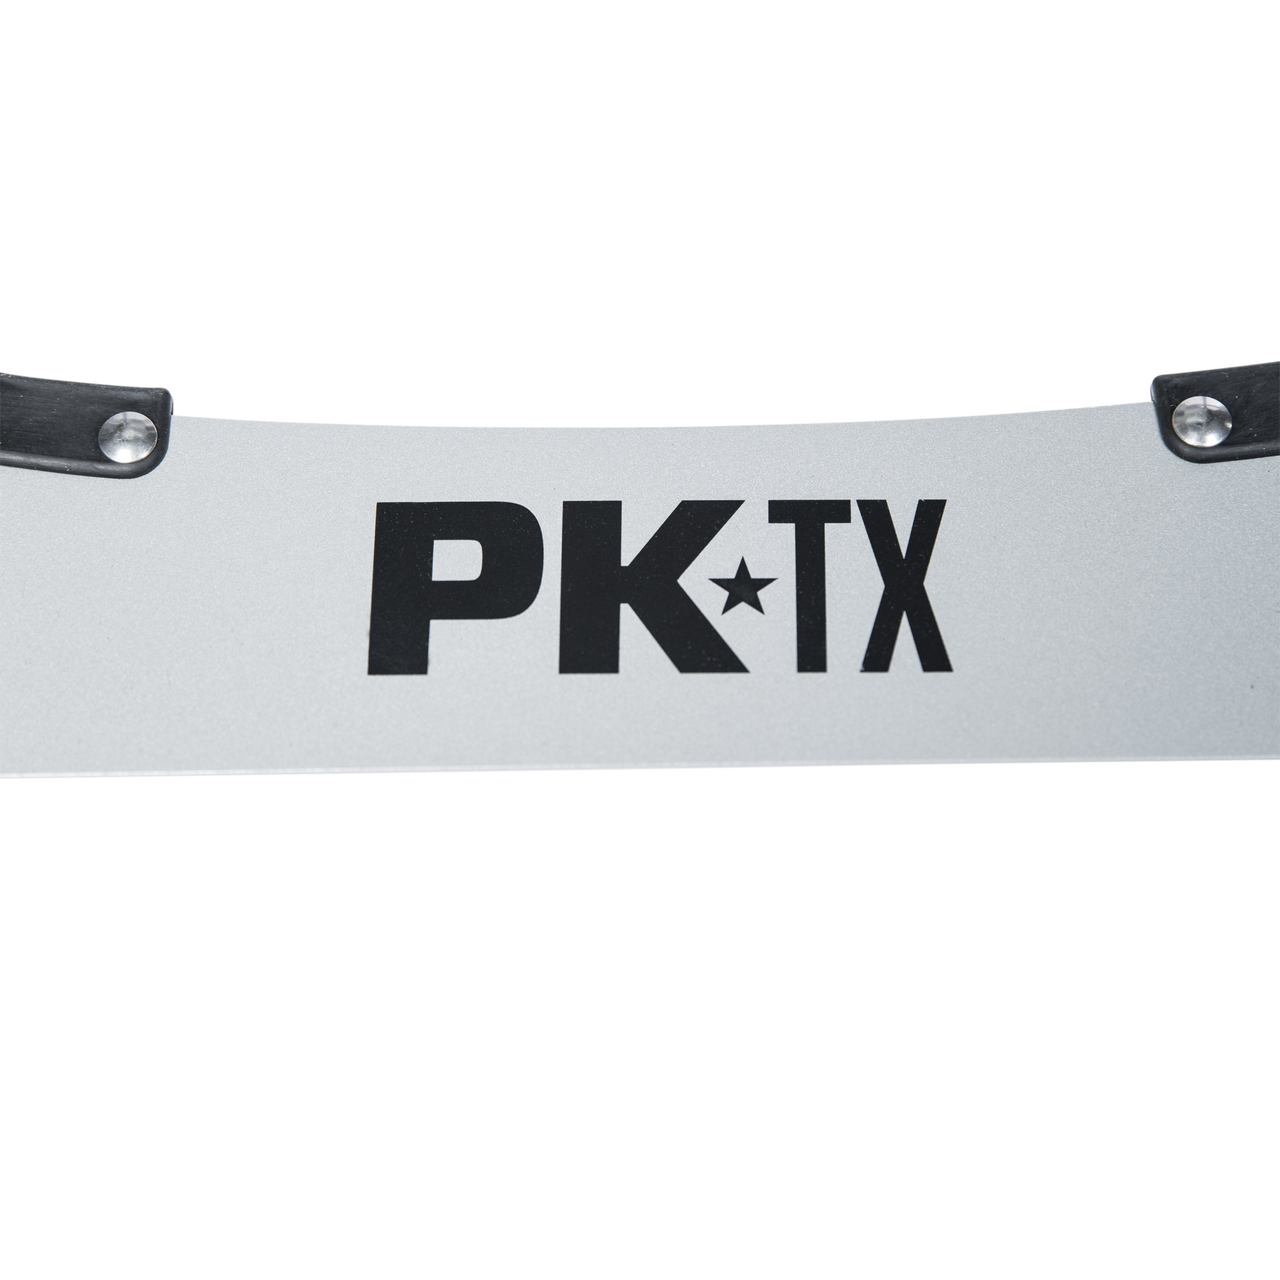 The Original Pktx Charcoal Grill In Silver Pk Grills